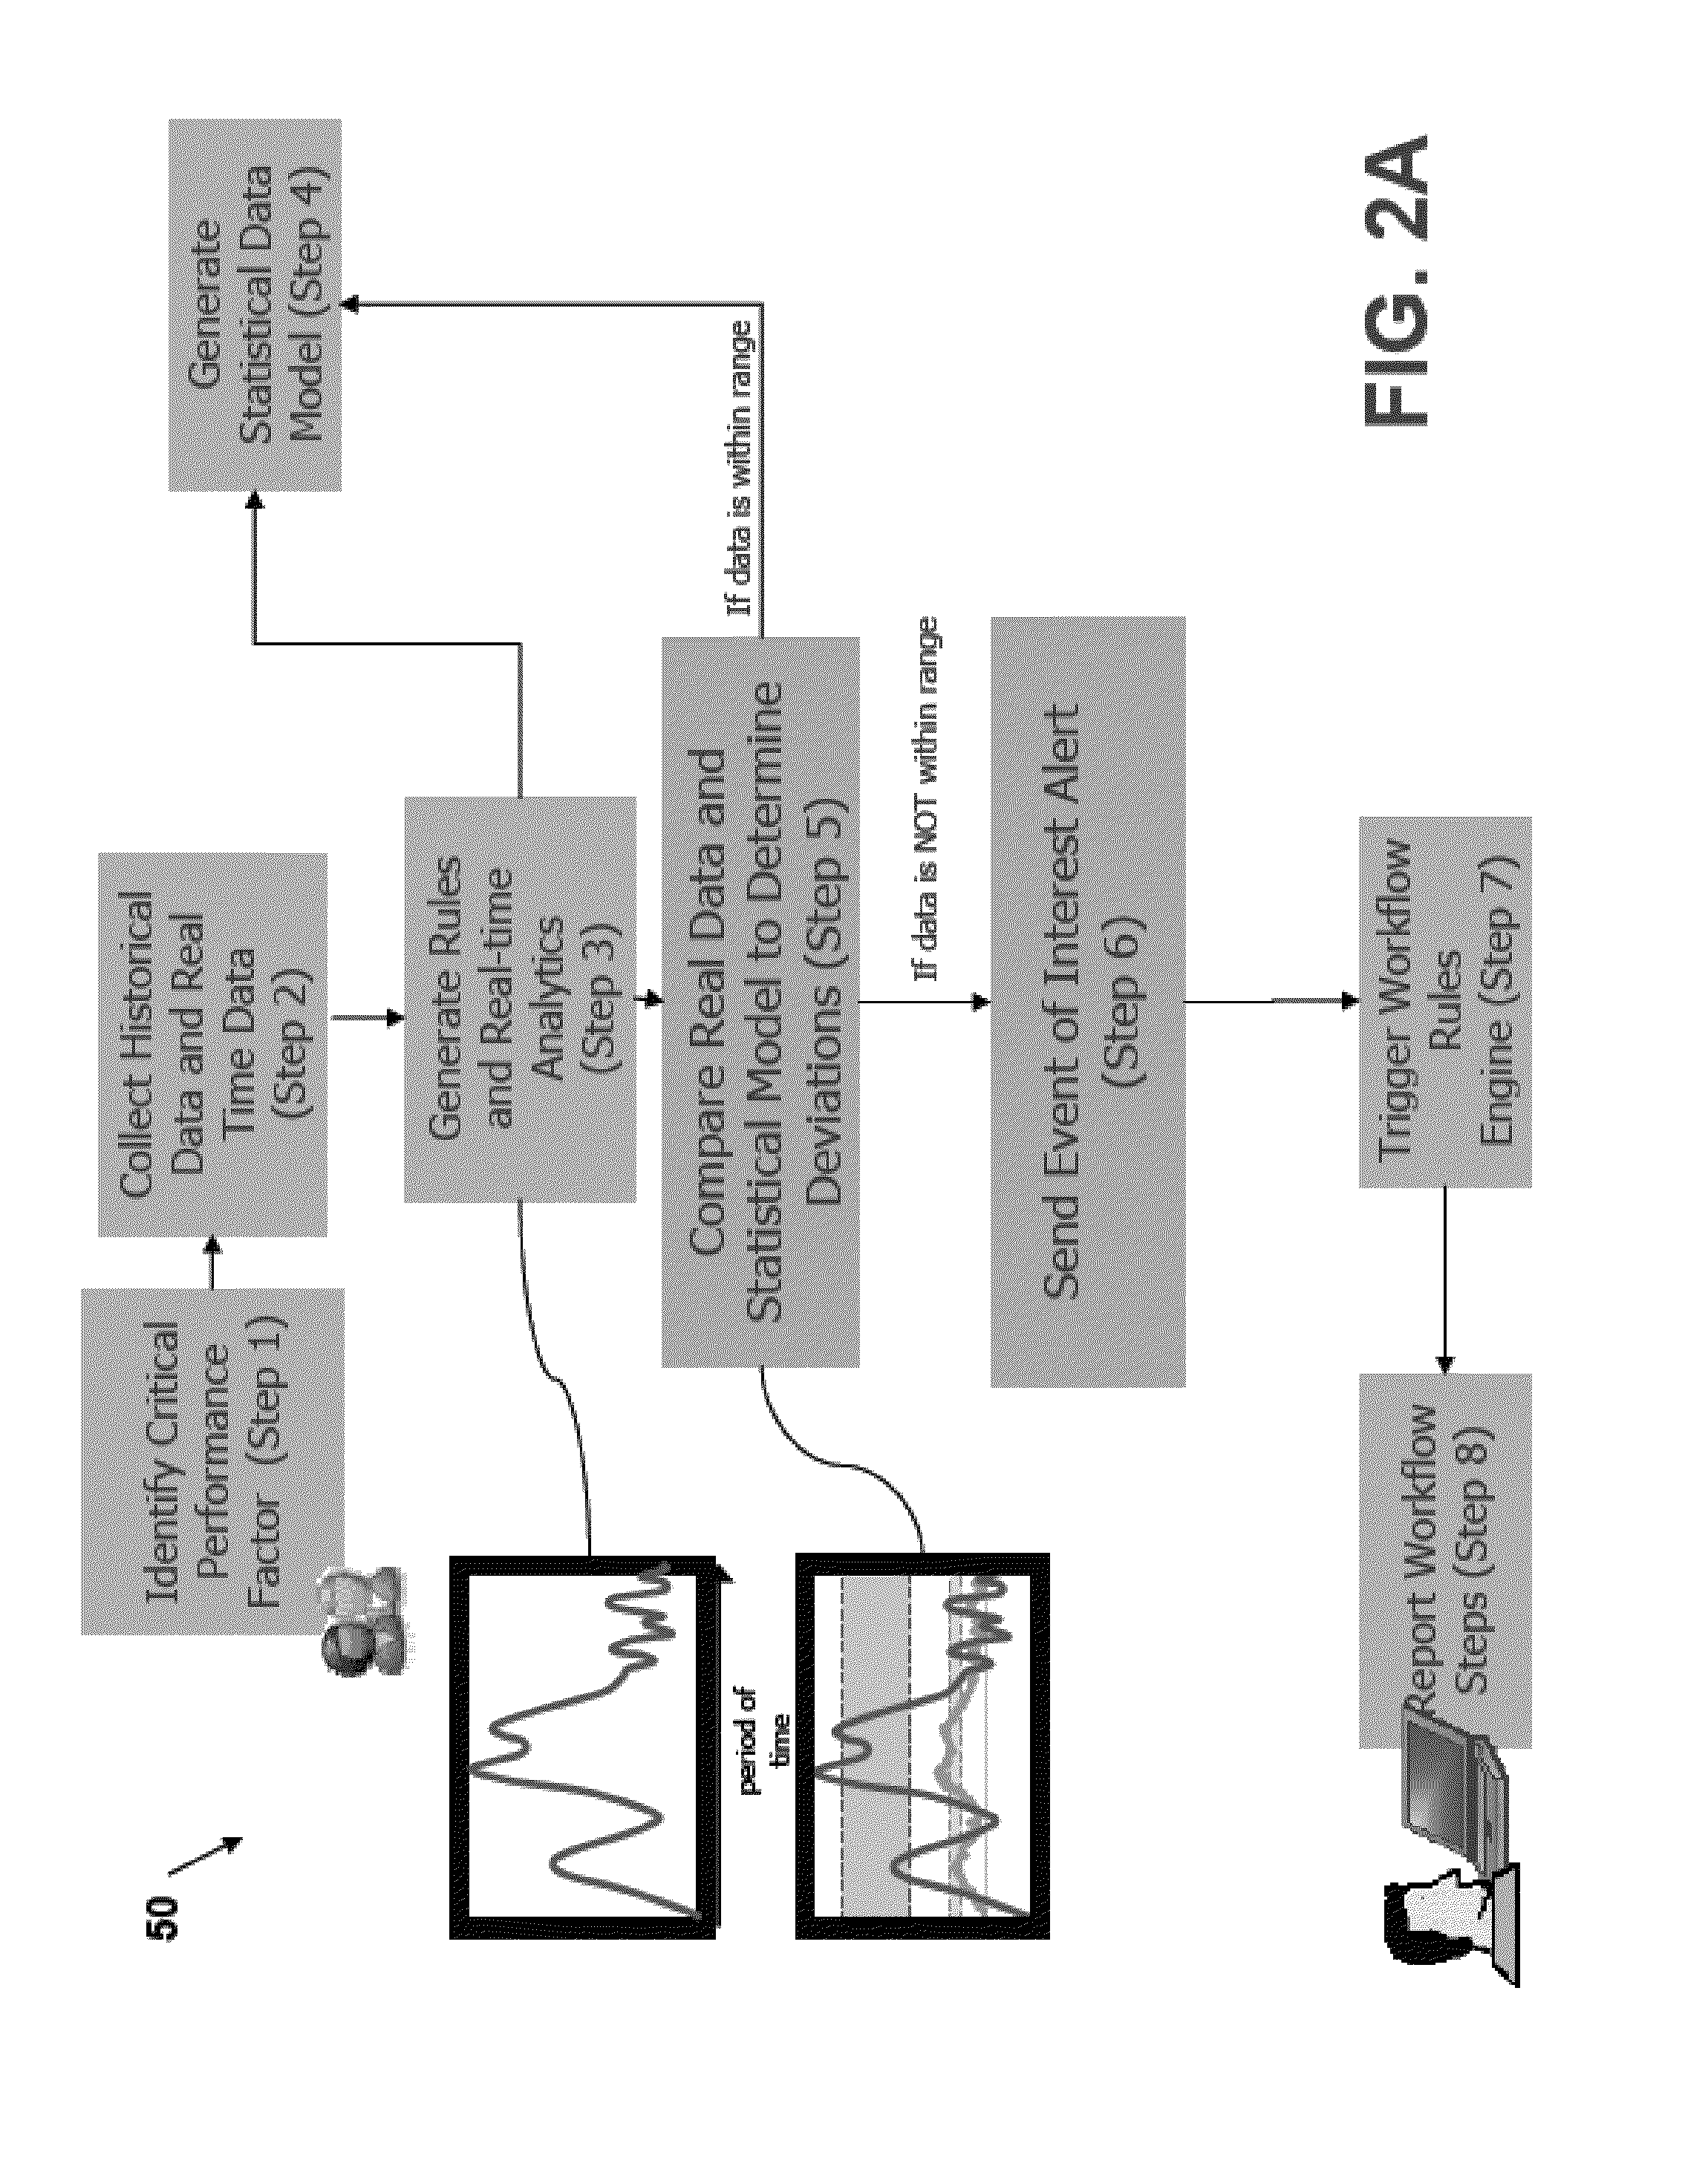 Systems and Methods for Managing Multi-Component Systems in an Infrastructure